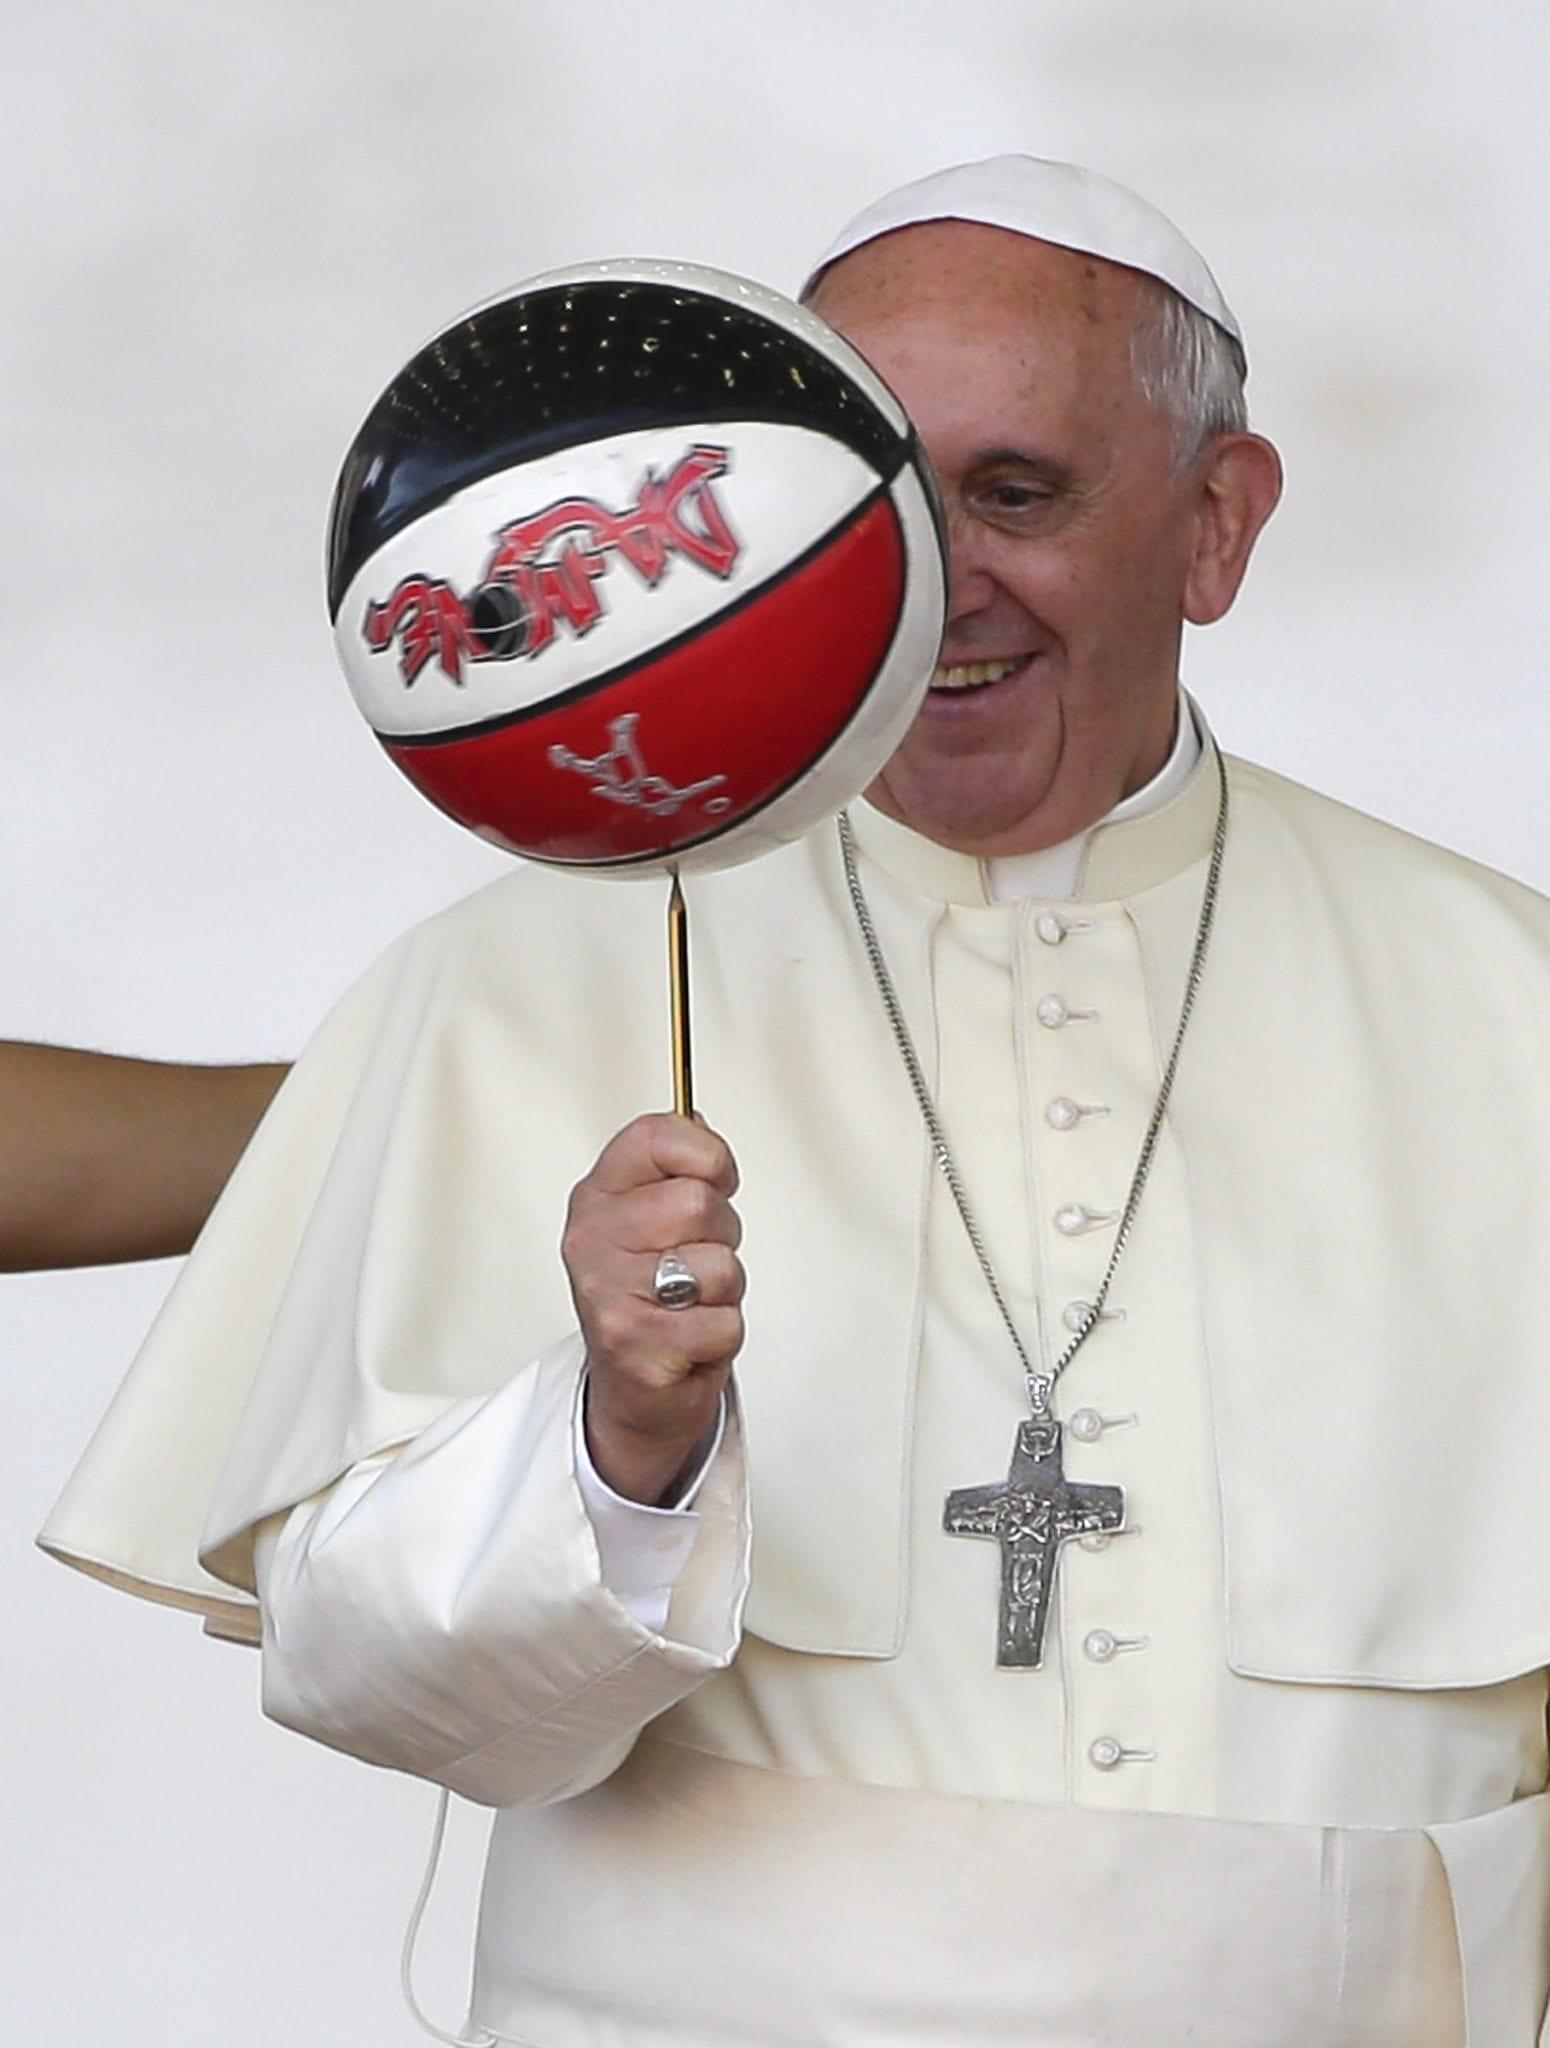 Pope tells sports summit that integrity matters more than victory